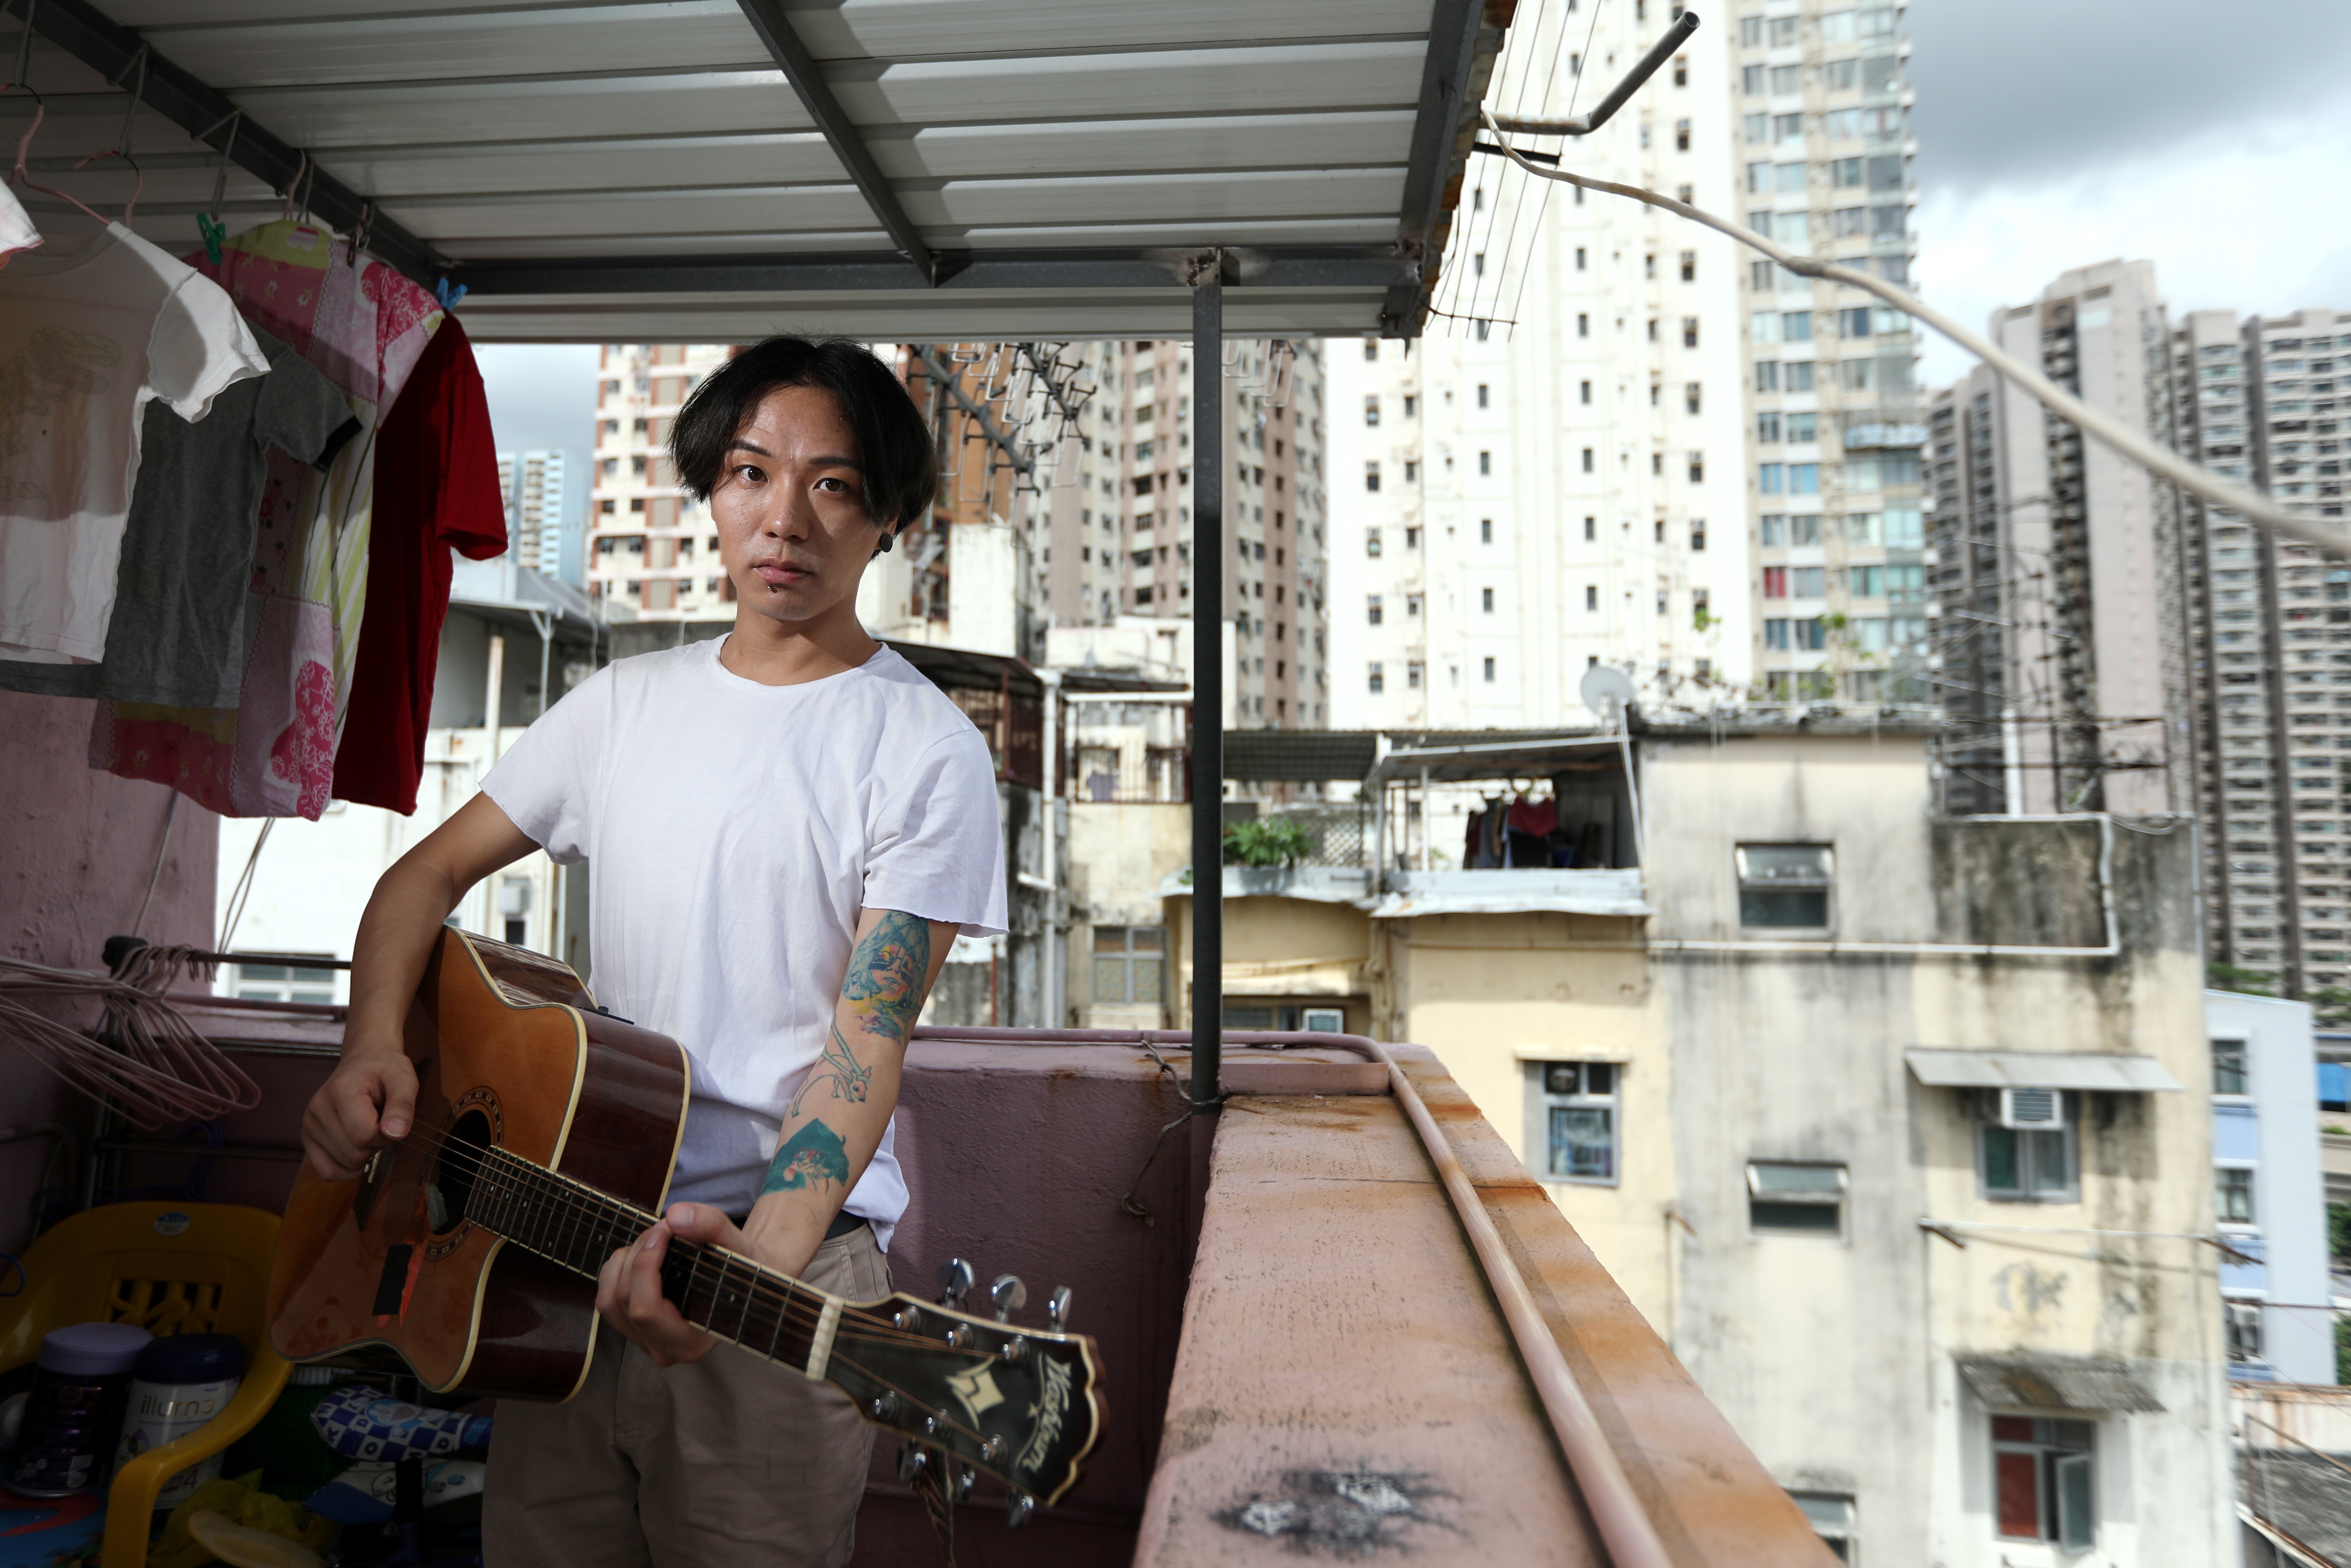 See Wai-chung expresses the trials and tribulations of the mentally ill through his music. Photo: Xiaomei Chen